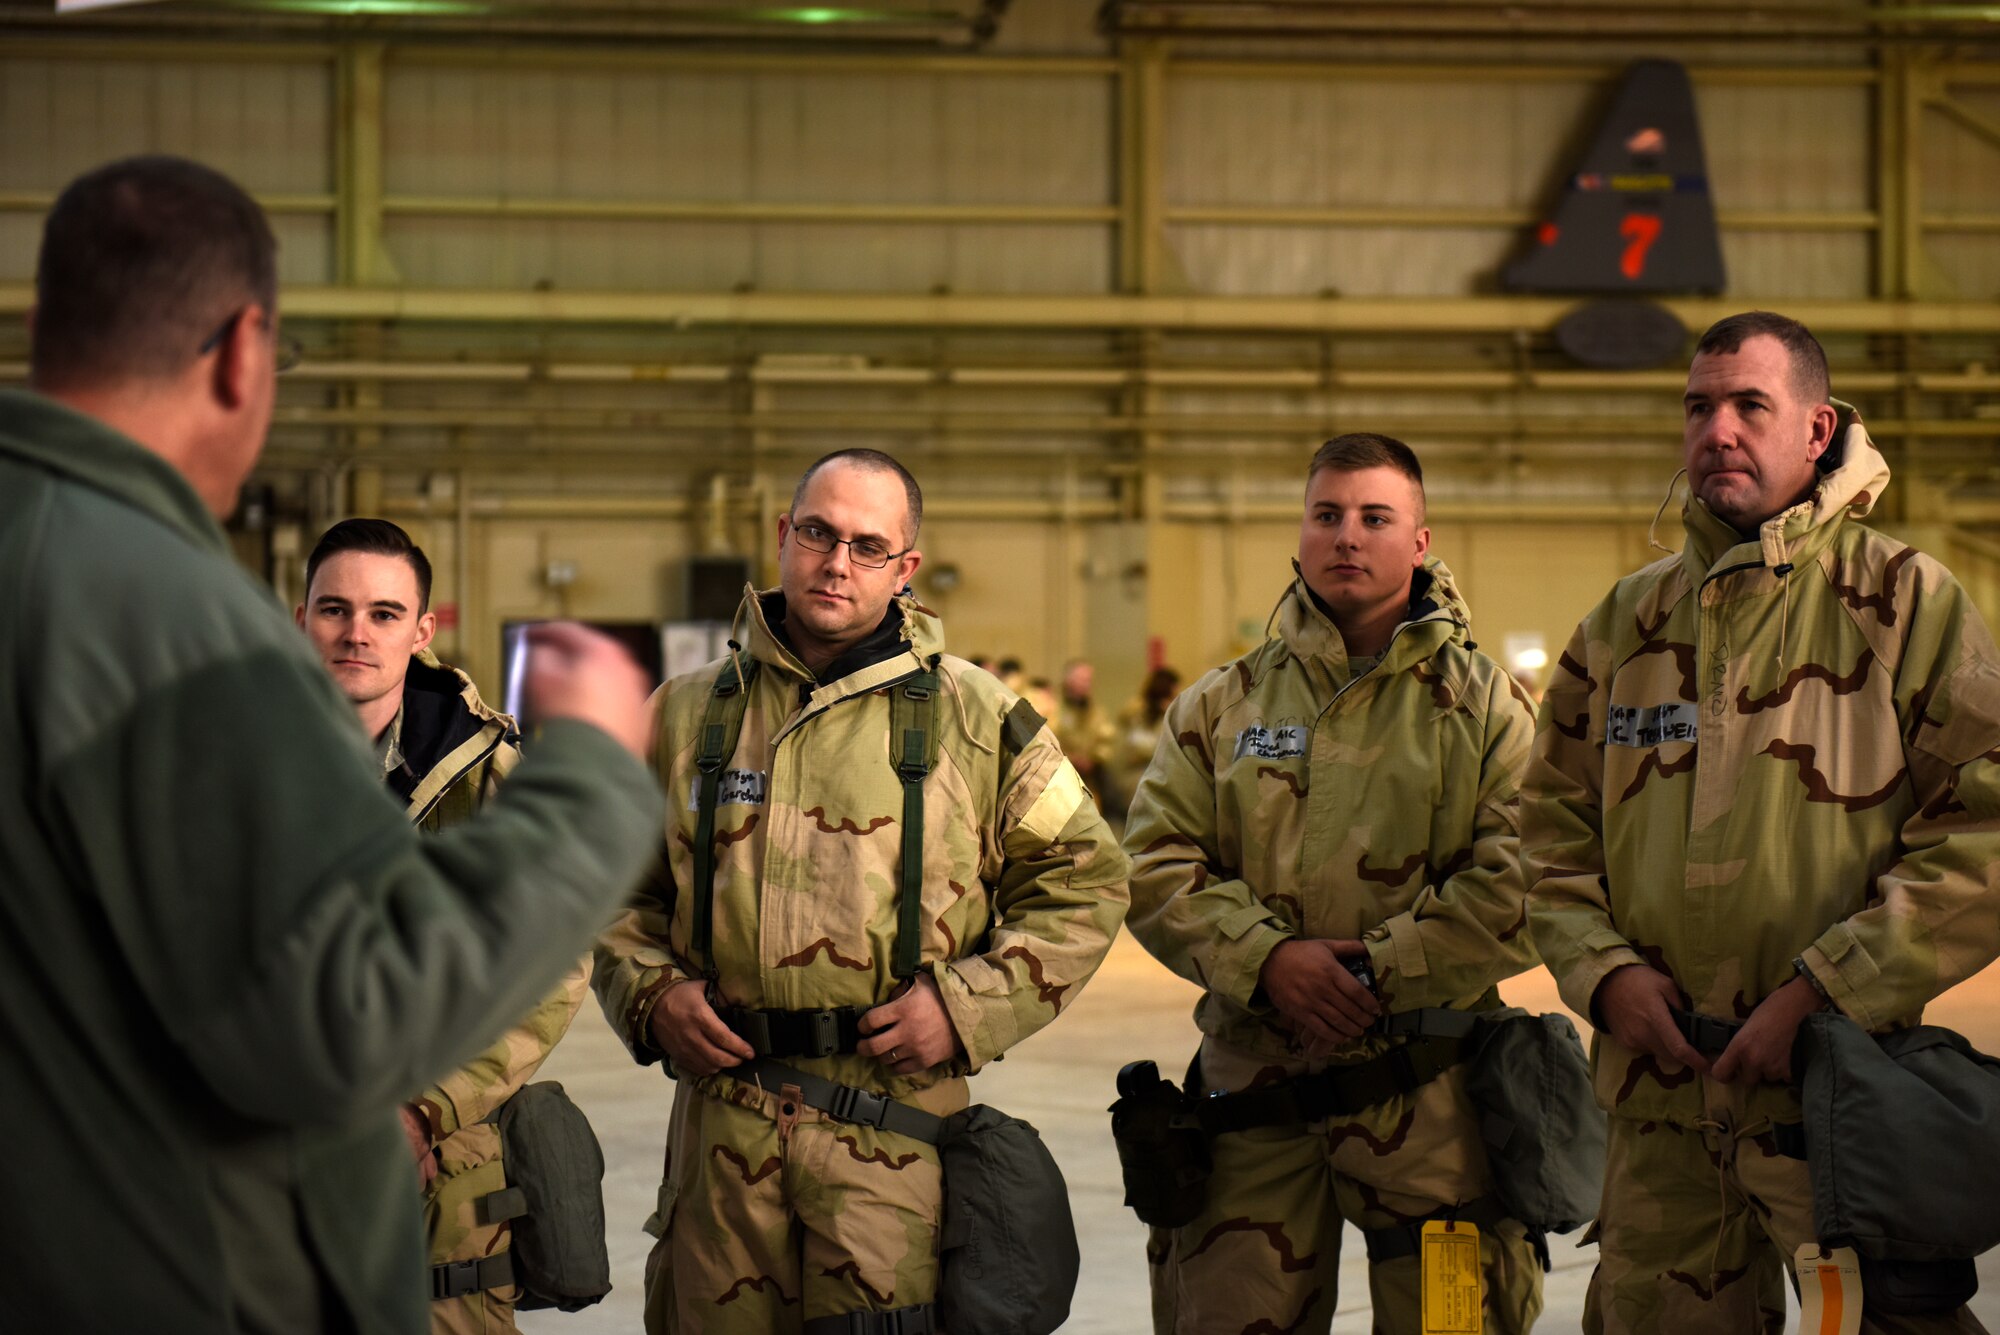 Members of the North Carolina Air National Guard participate in an Ability To Survive and Operate (ATSO) training held in a C-17 Globemaster III hangar at the North Carolina Air National Guard (NCANG) Base, Charlotte Douglas International Airport, Jan. 10, 2019. The ATSO exercise consists of ten rotating stations and serves as refresher training for situations like self-aid buddy care, explosive ordinance device recognition, and chemical warfare decontamination stations.